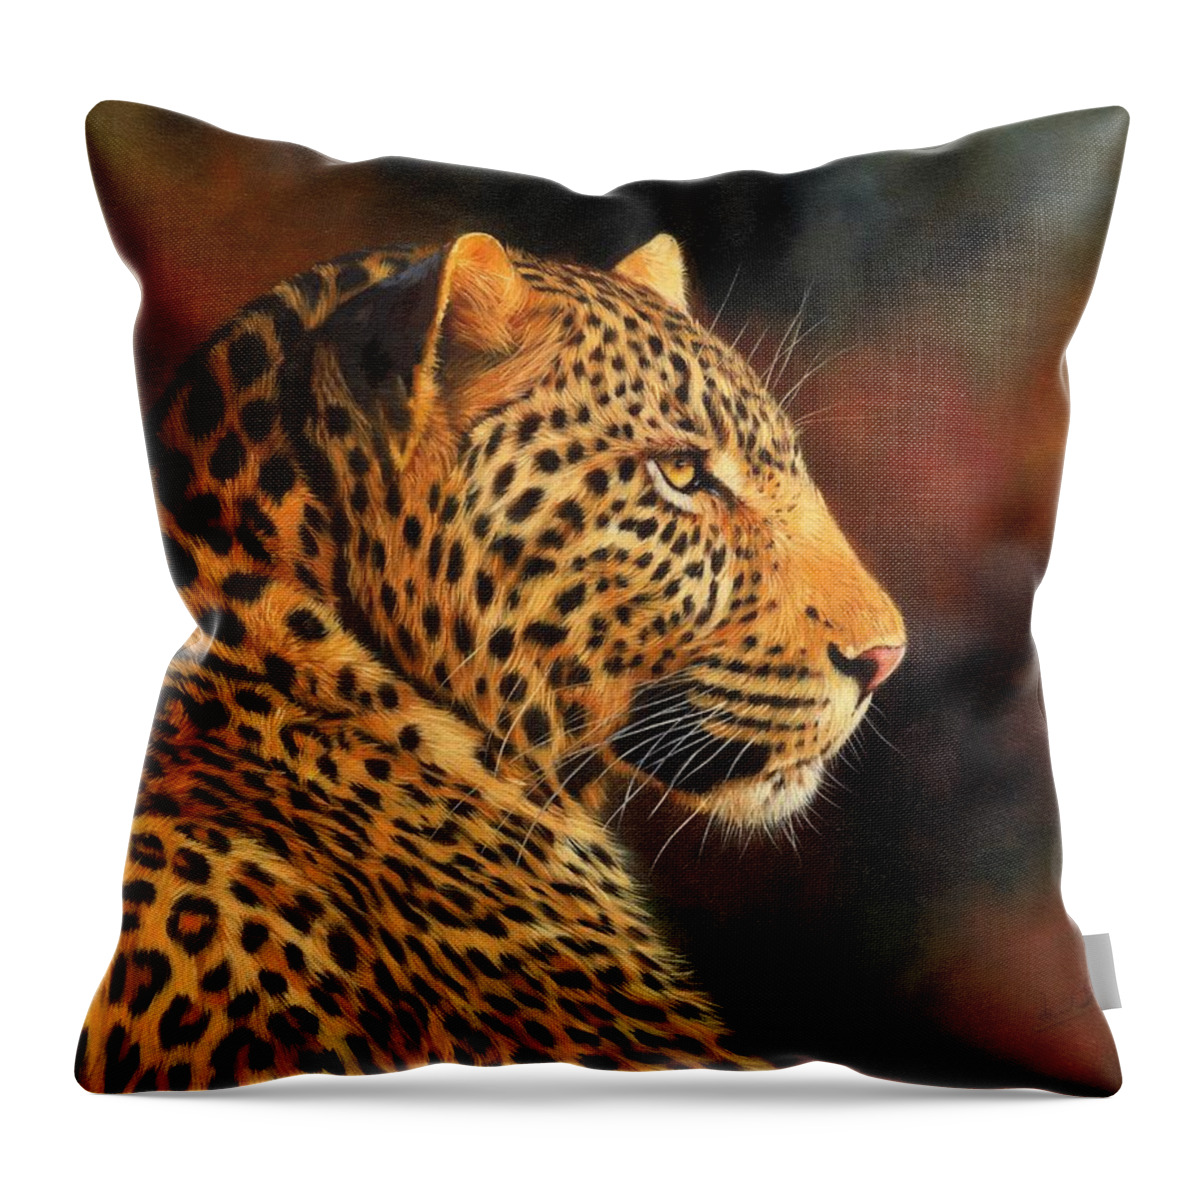 Leopard Throw Pillow featuring the painting Golden Leopard by David Stribbling